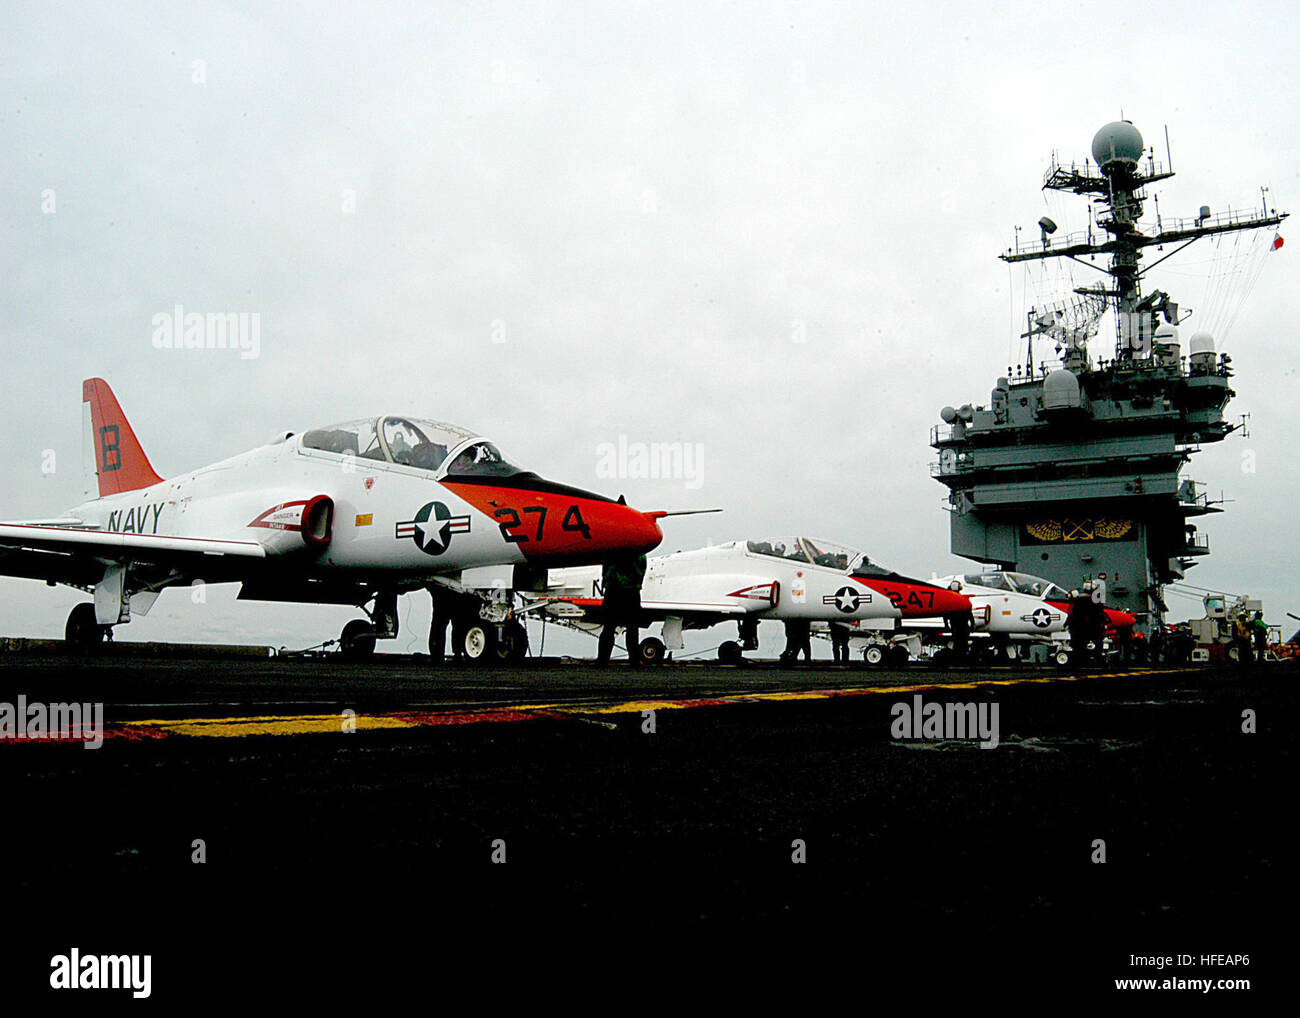 050309-N-4565G-002 Atlantic Ocean (Mar. 9, 2005) - Squadron personal assigned to the “Golden Eagles” of Fixed Wing Training Squadron Two Two (VT-22), begin pre-flight checks on their T-45A Goshawks prior to carrier qualification operations aboard the conventionally powered aircraft carrier USS John F. Kennedy (CV 67). The T-45A Goshawk is a carrier-capable trainer aircraft used by both the Navy and Marine Corps for pilot training. The Mayport, Fla., based aircraft carrier is conducting scheduled carrier qualifications in the Atlantic Ocean. U.S. Navy photo by Photographer’s Mate 3rd Class Tomm Stock Photo